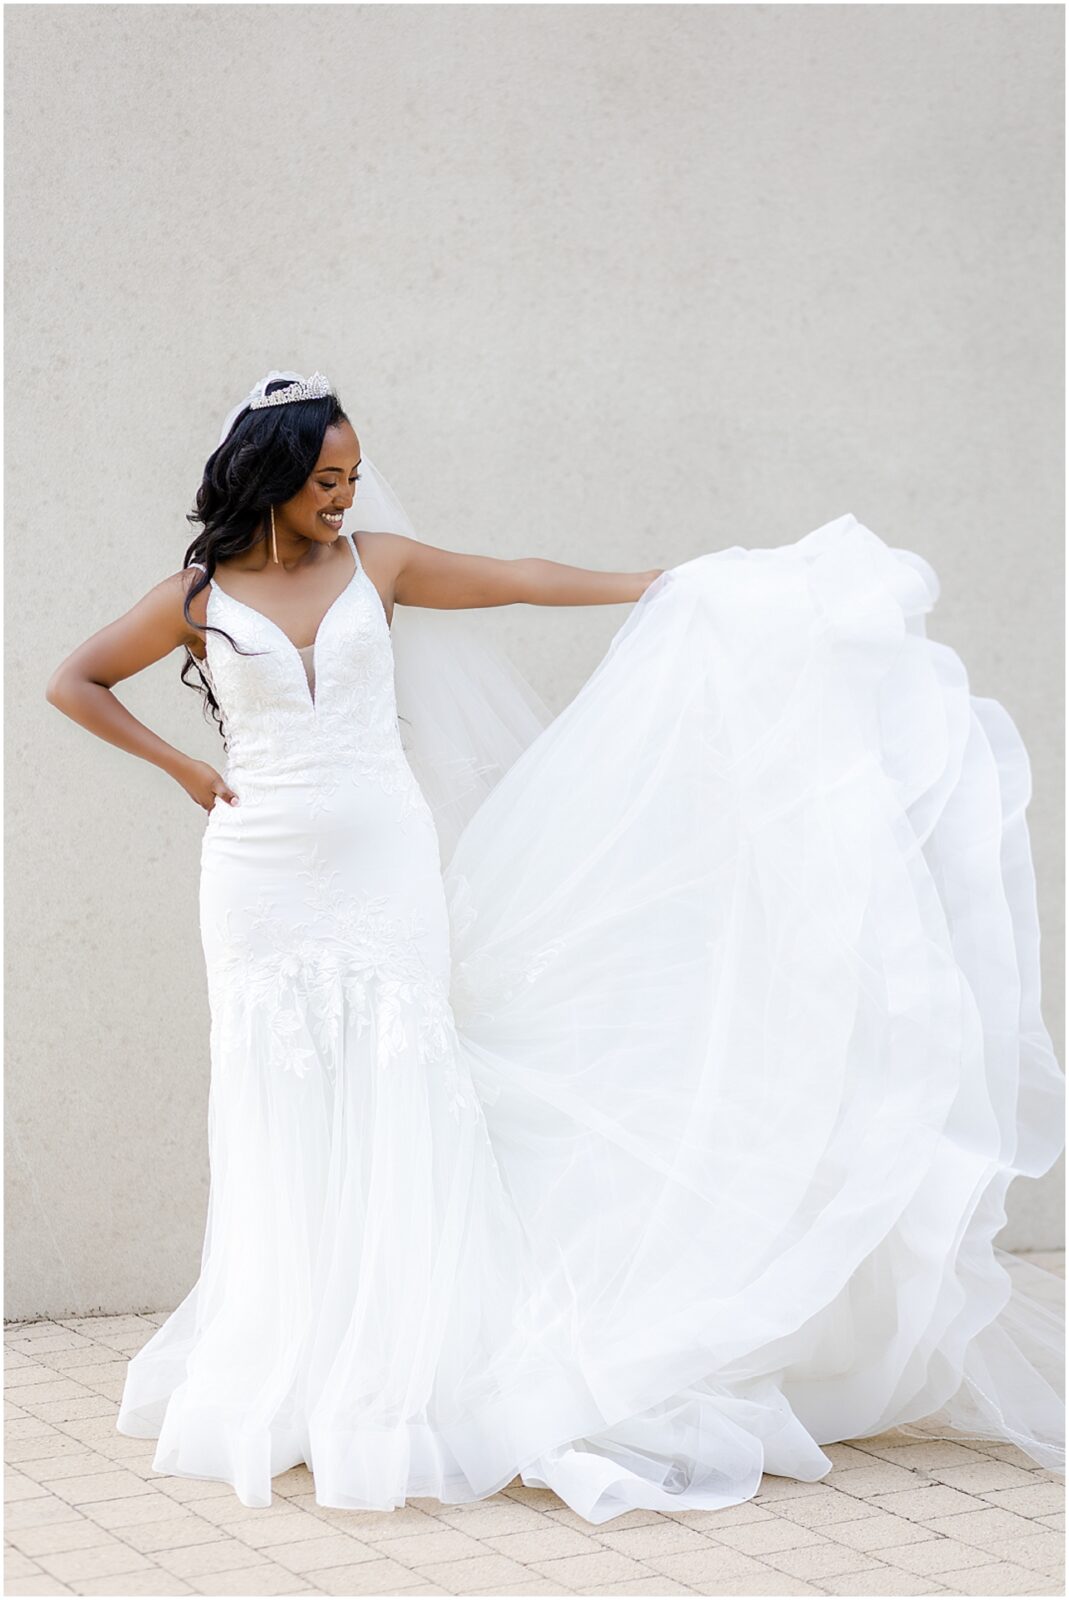 Kansas City Wedding Photography | Affordable Wedding Photographer in KC | Luxury Wedding Photography and Engagement Photos for Ethiopian Wedding in KC by Mariam Saifan Photography at Loews Hotel and Kauffman Center  | Epic Dress Wedding 